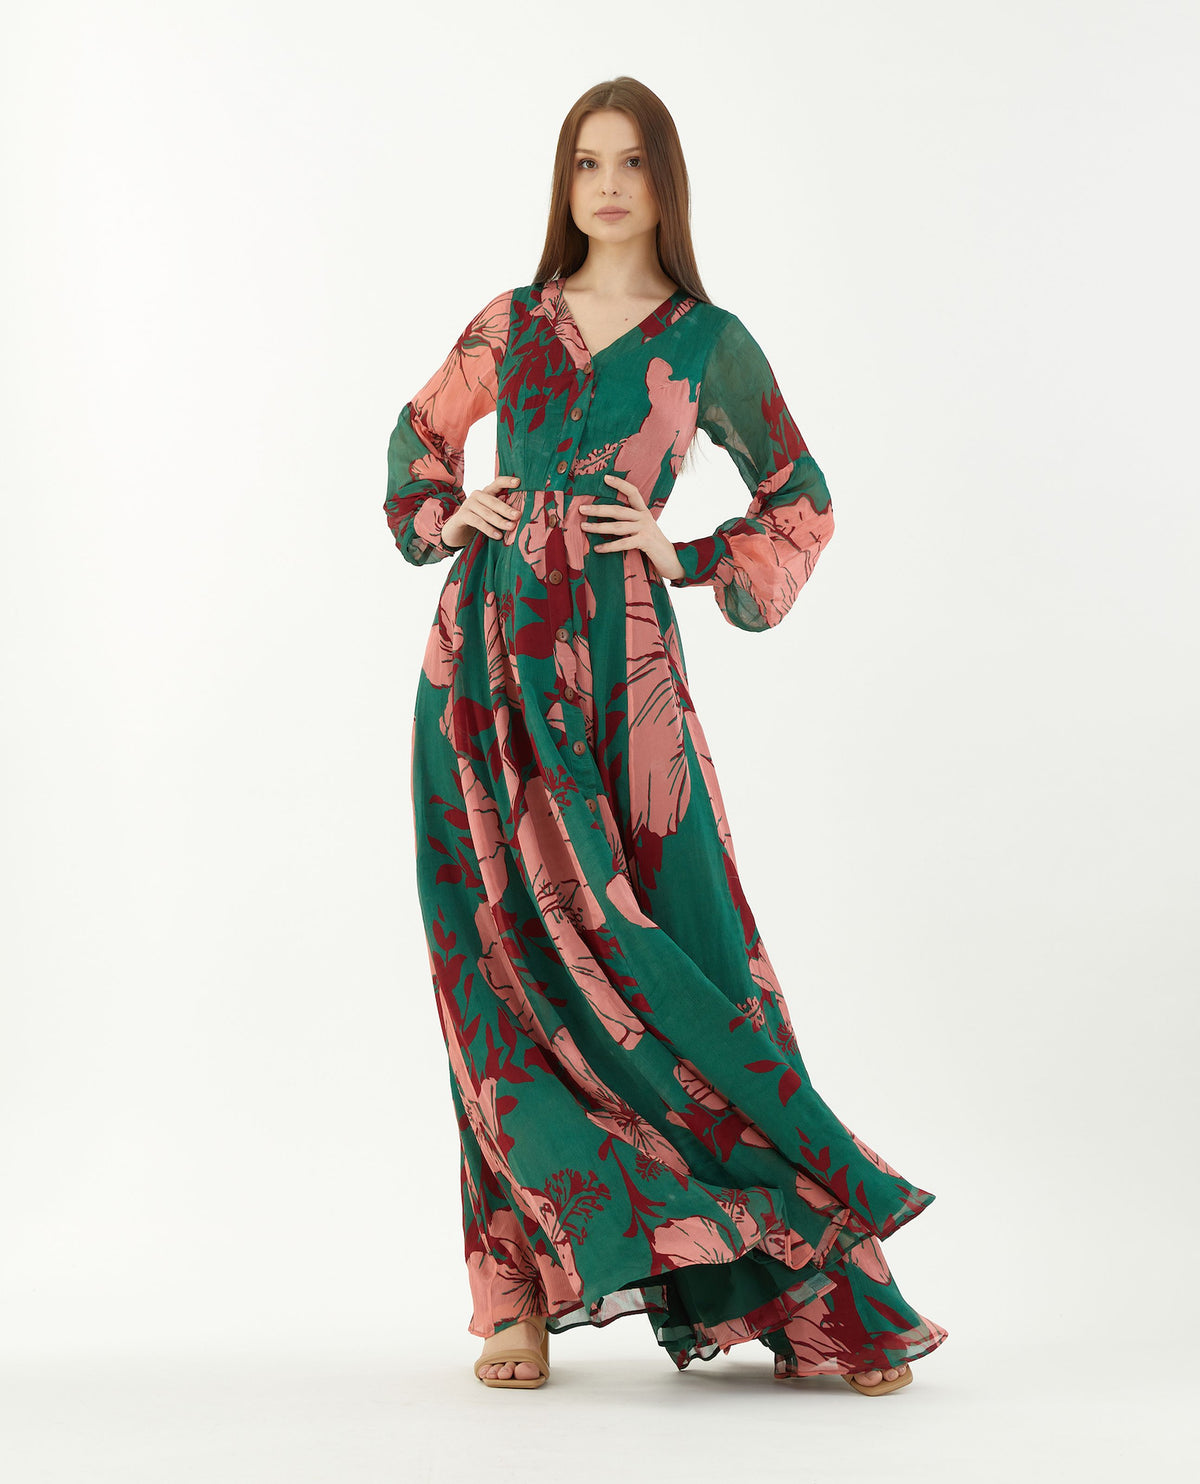 GREEN, PINK AND RED FLORAL LONG SHIRT DRESS